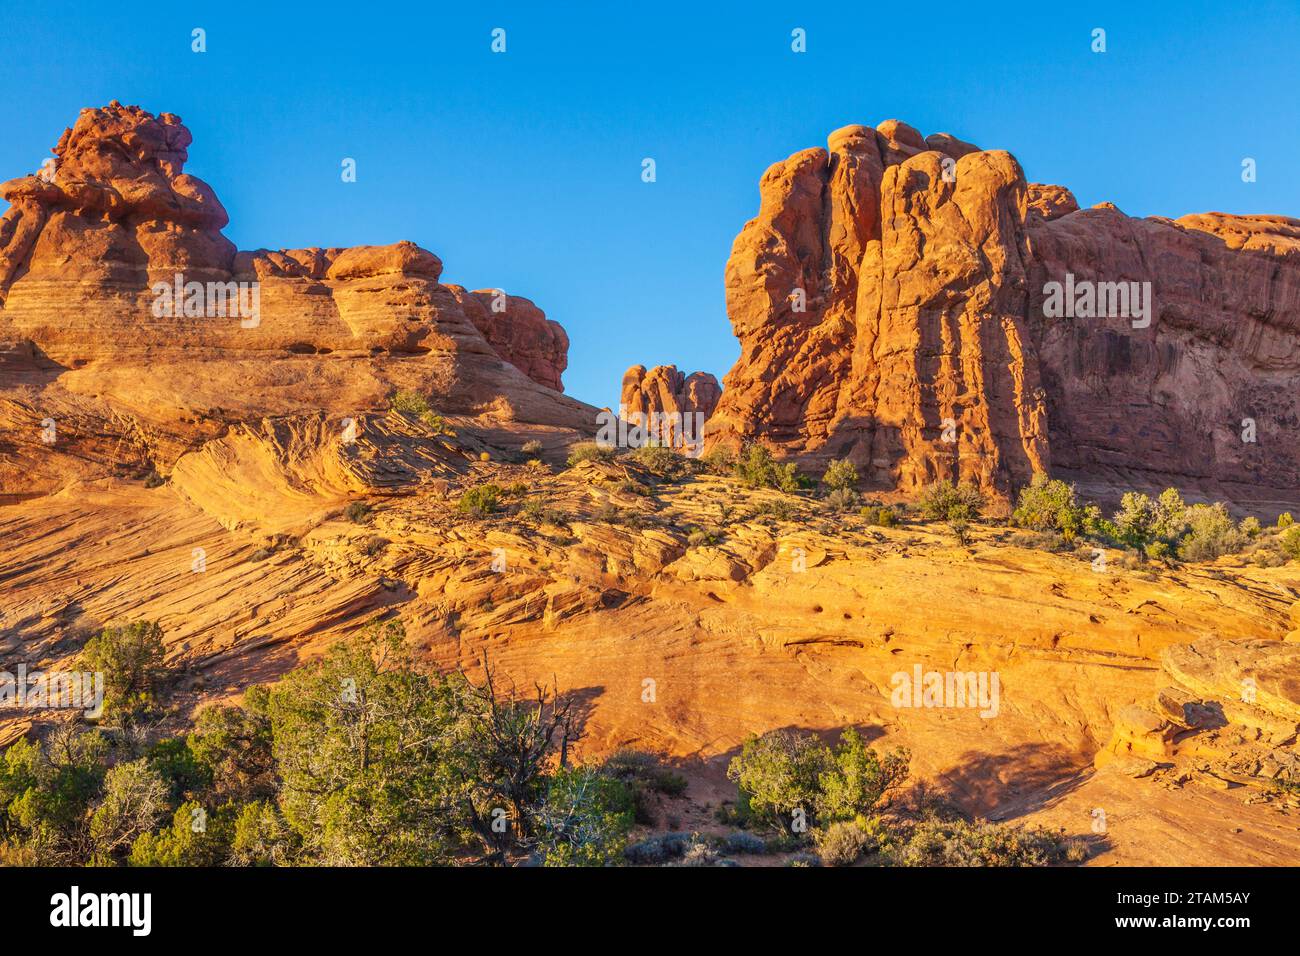 Sandstone rock formations in evening light in Arches National Park in Utah. Stock Photo